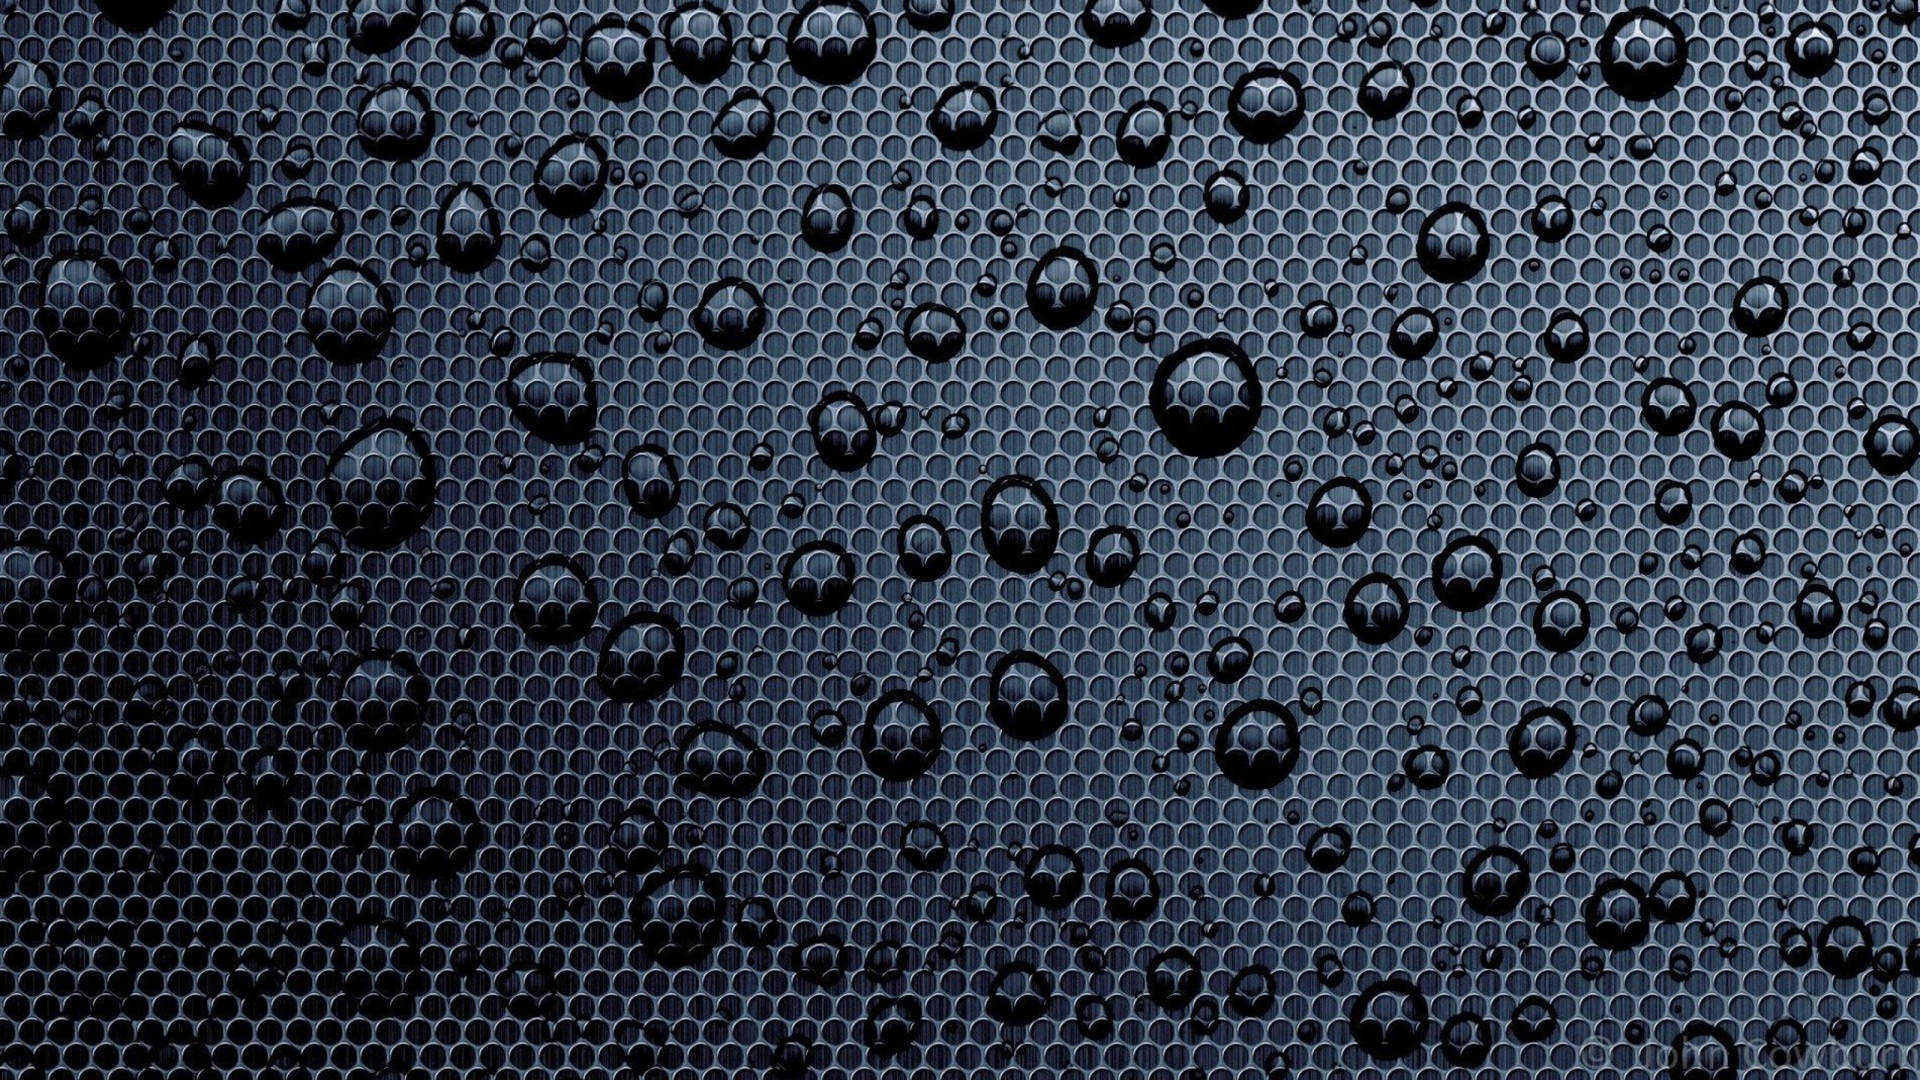 Gmail Clear Water Droplets Wallpaper